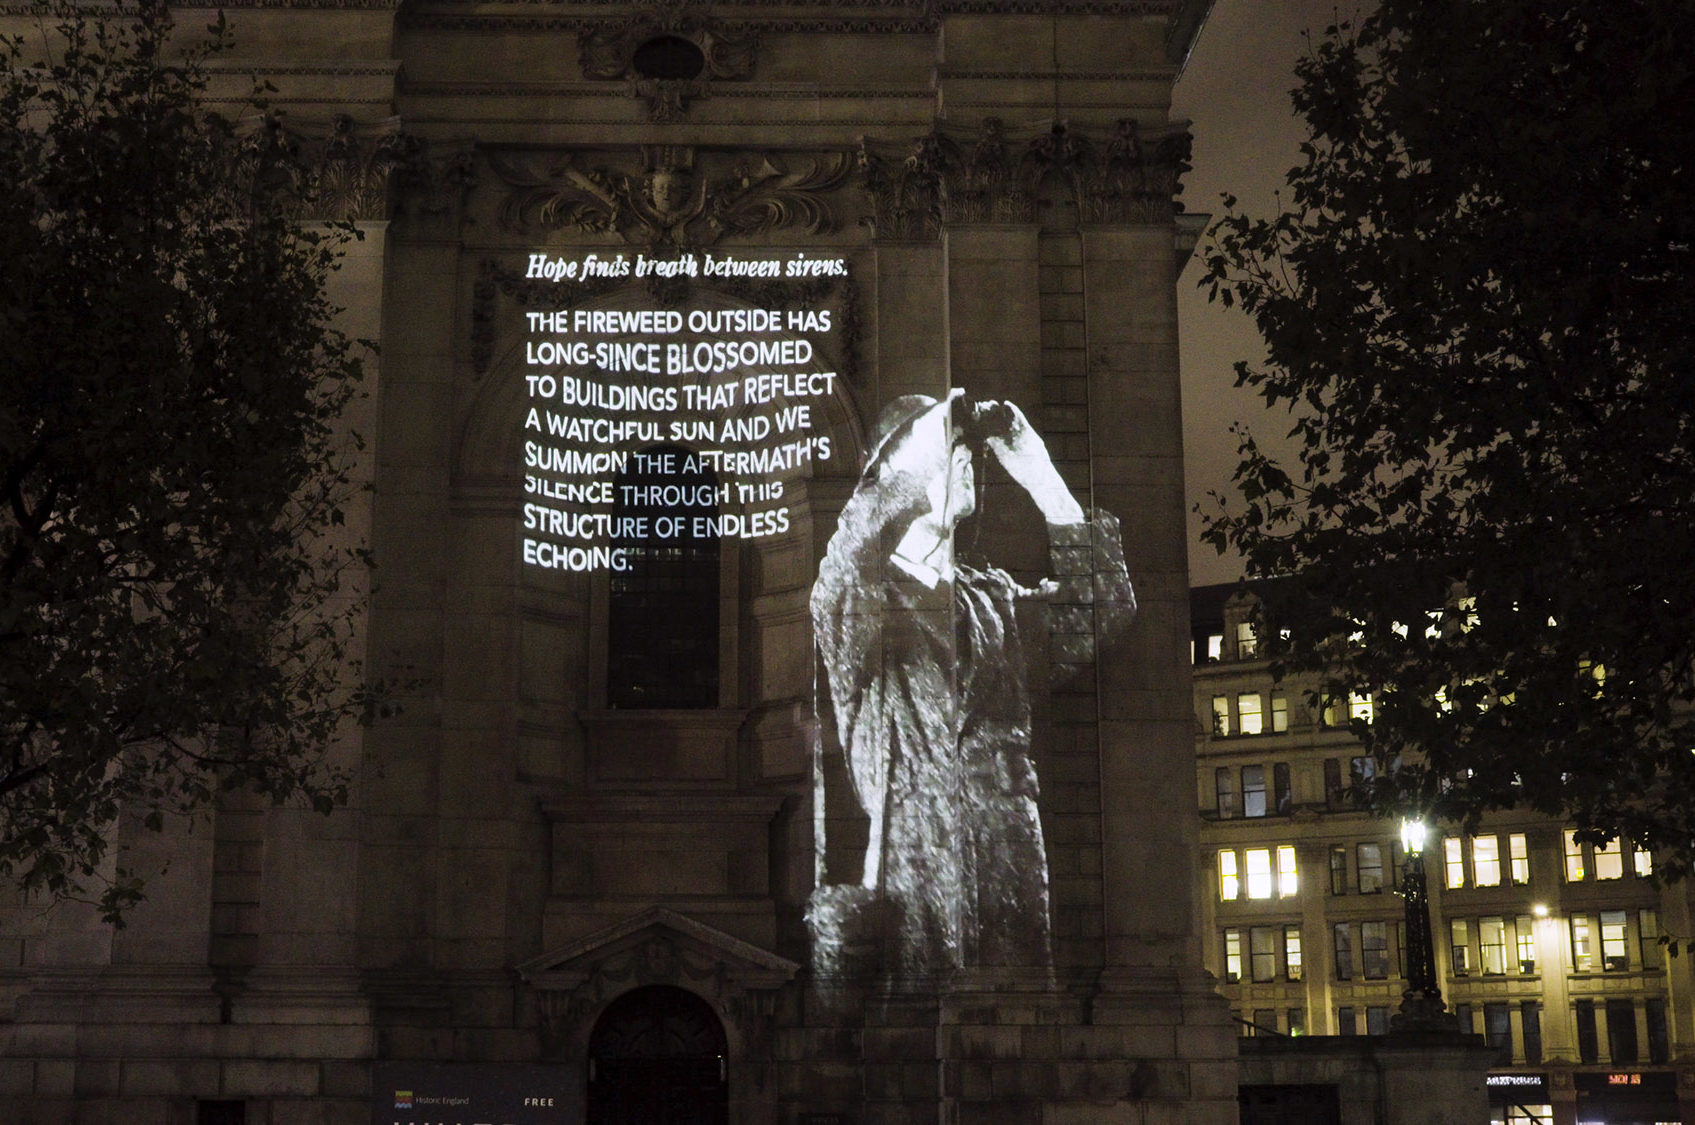 Where Light Falls, Projection mapping show on St Paul's Cathedral